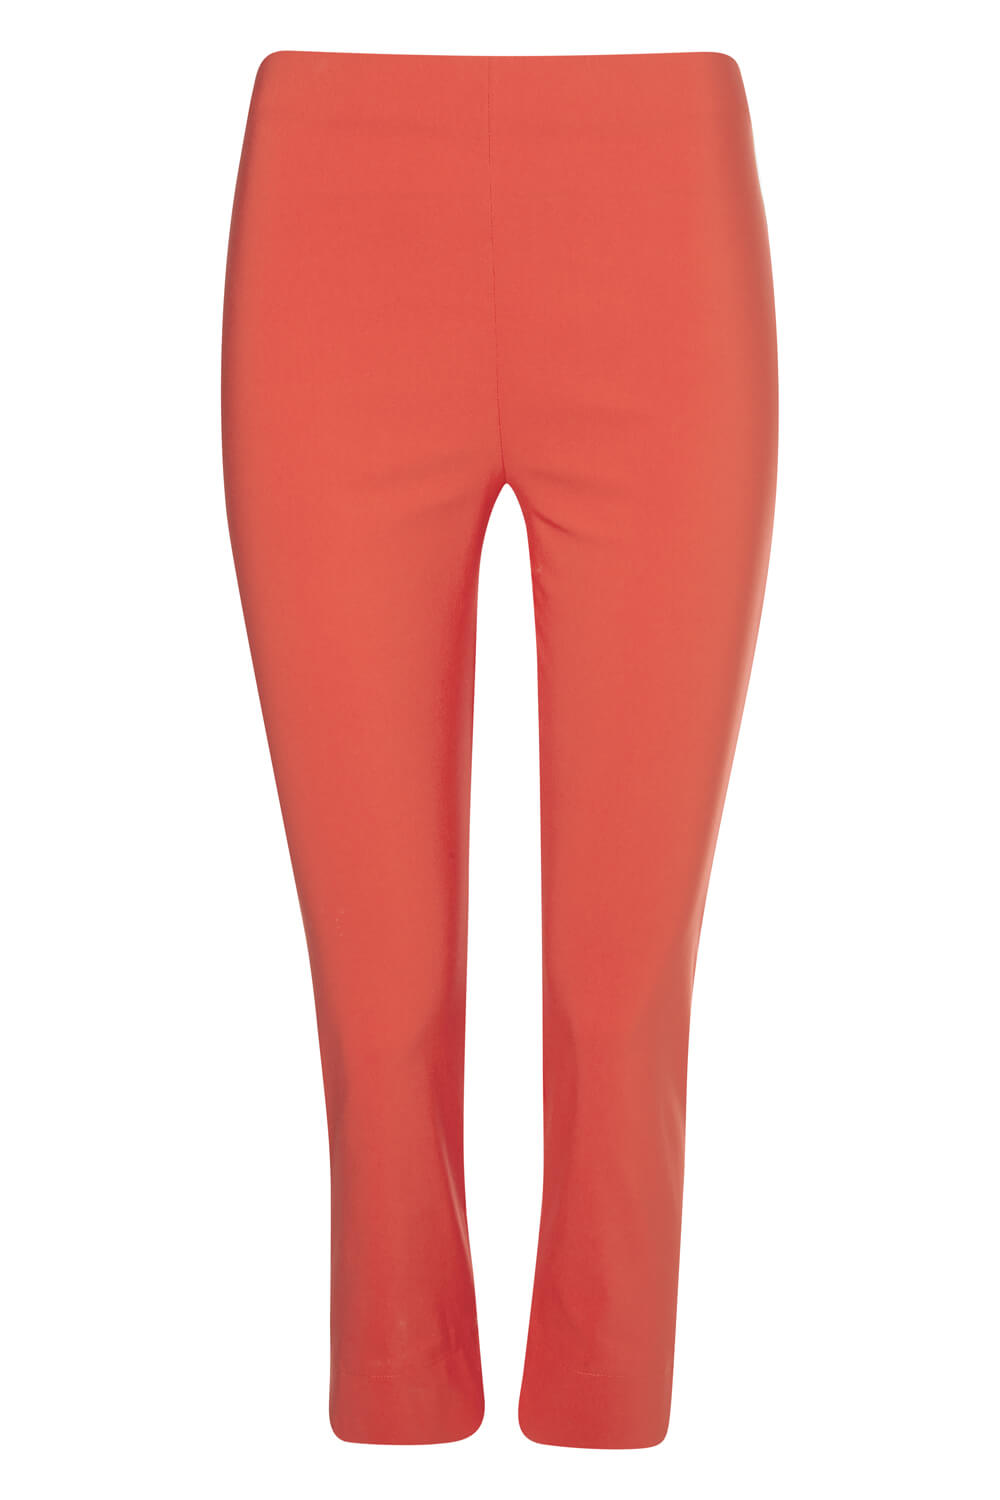 CORAL Cropped Stretch Trouser, Image 5 of 5